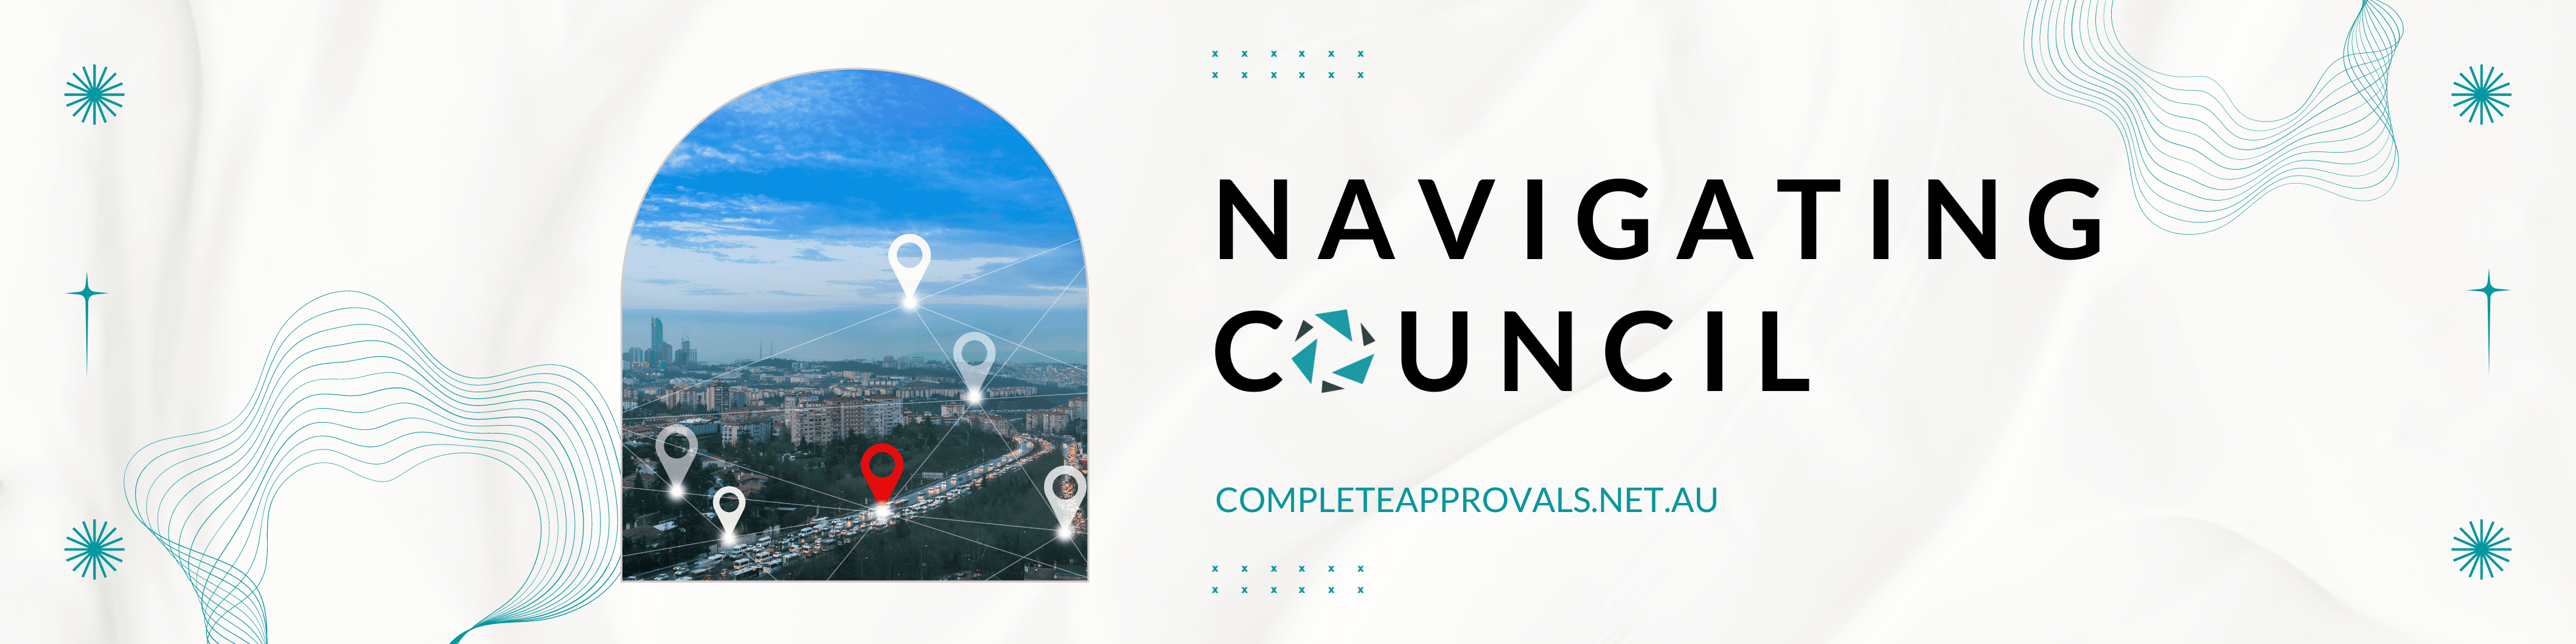 Navigating Council Complete Approvals